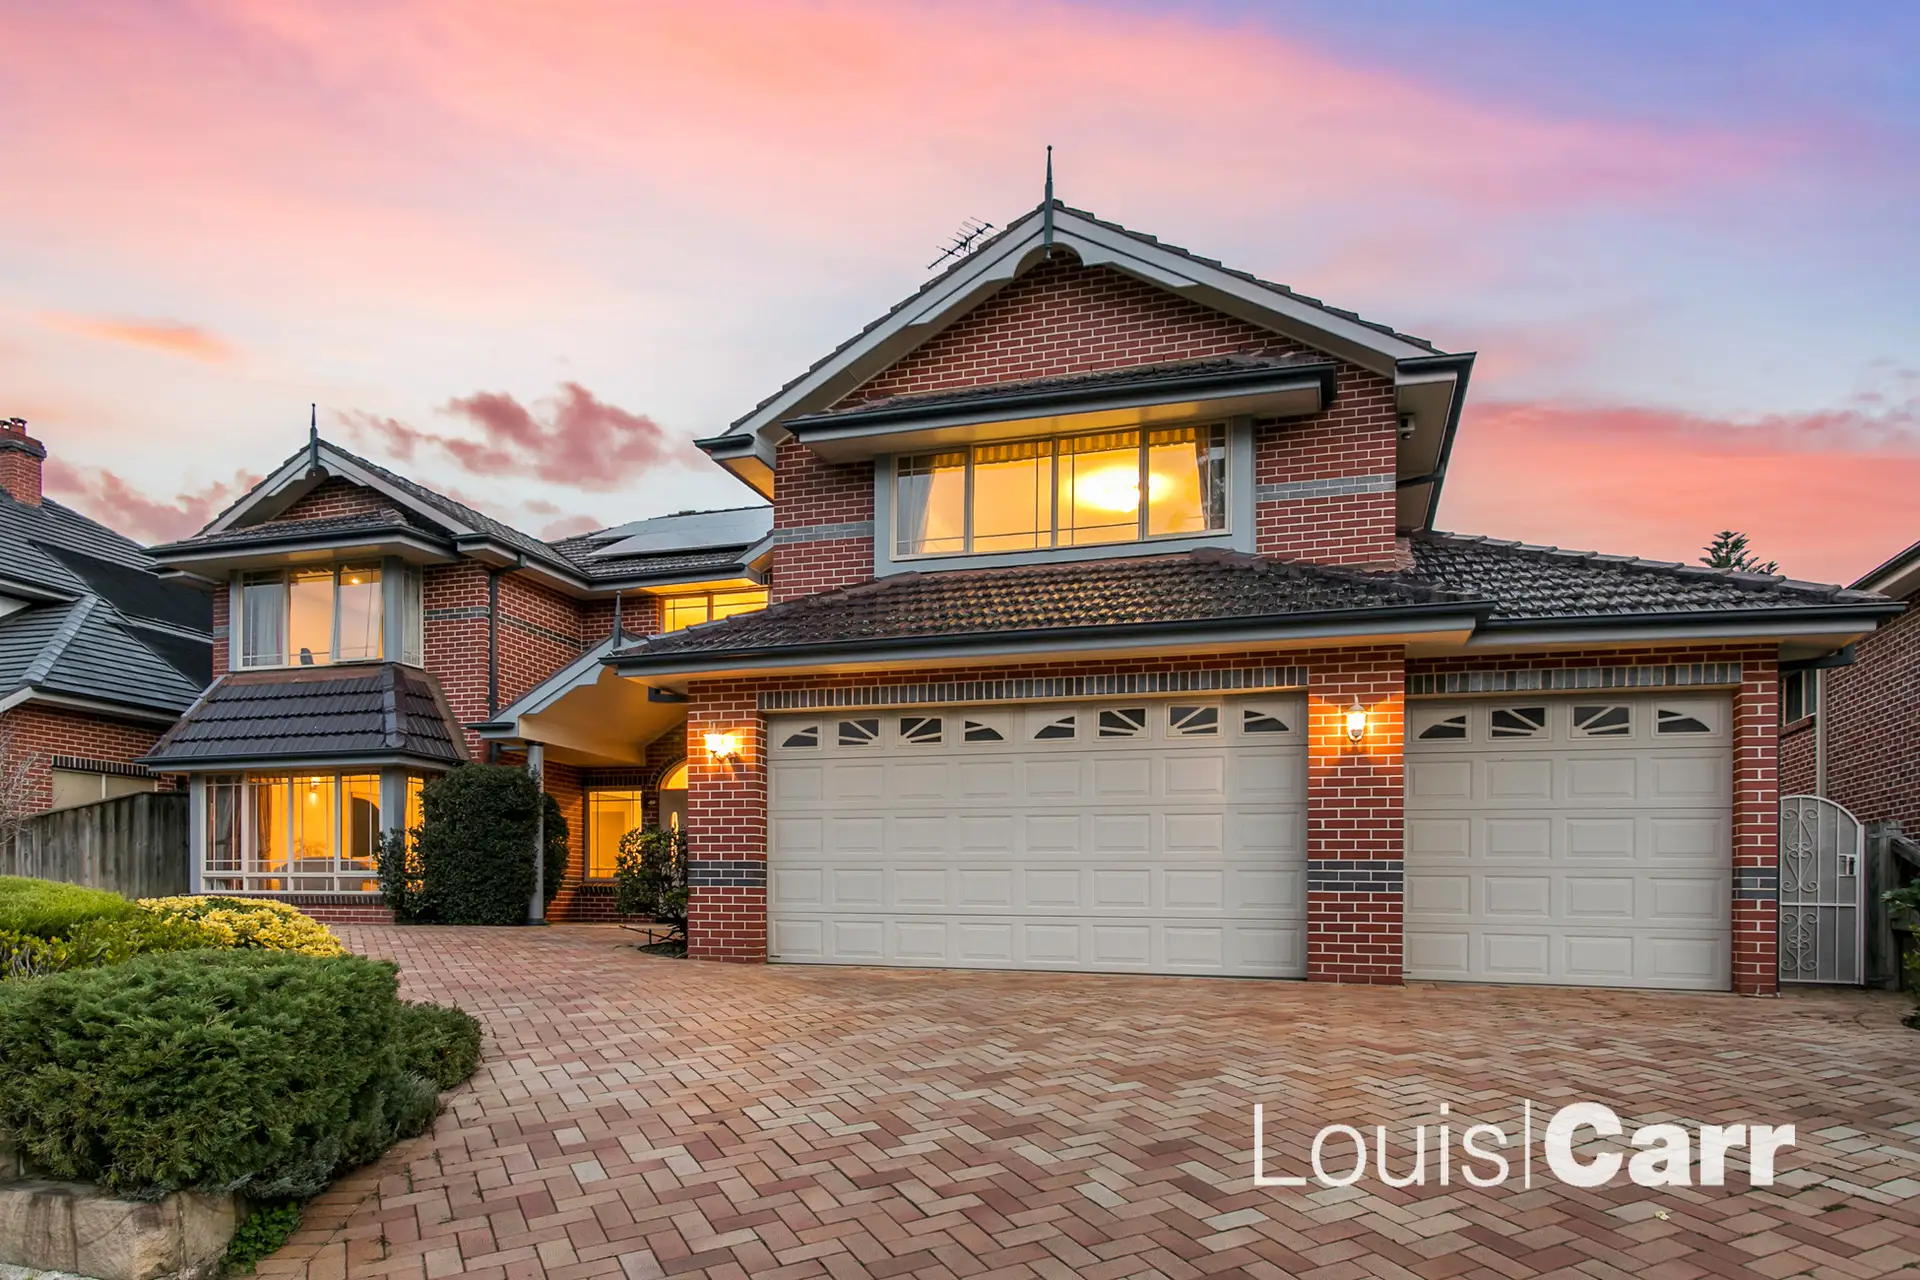 Photo #1: 5 Avonleigh Way, West Pennant Hills - Sold by Louis Carr Real Estate